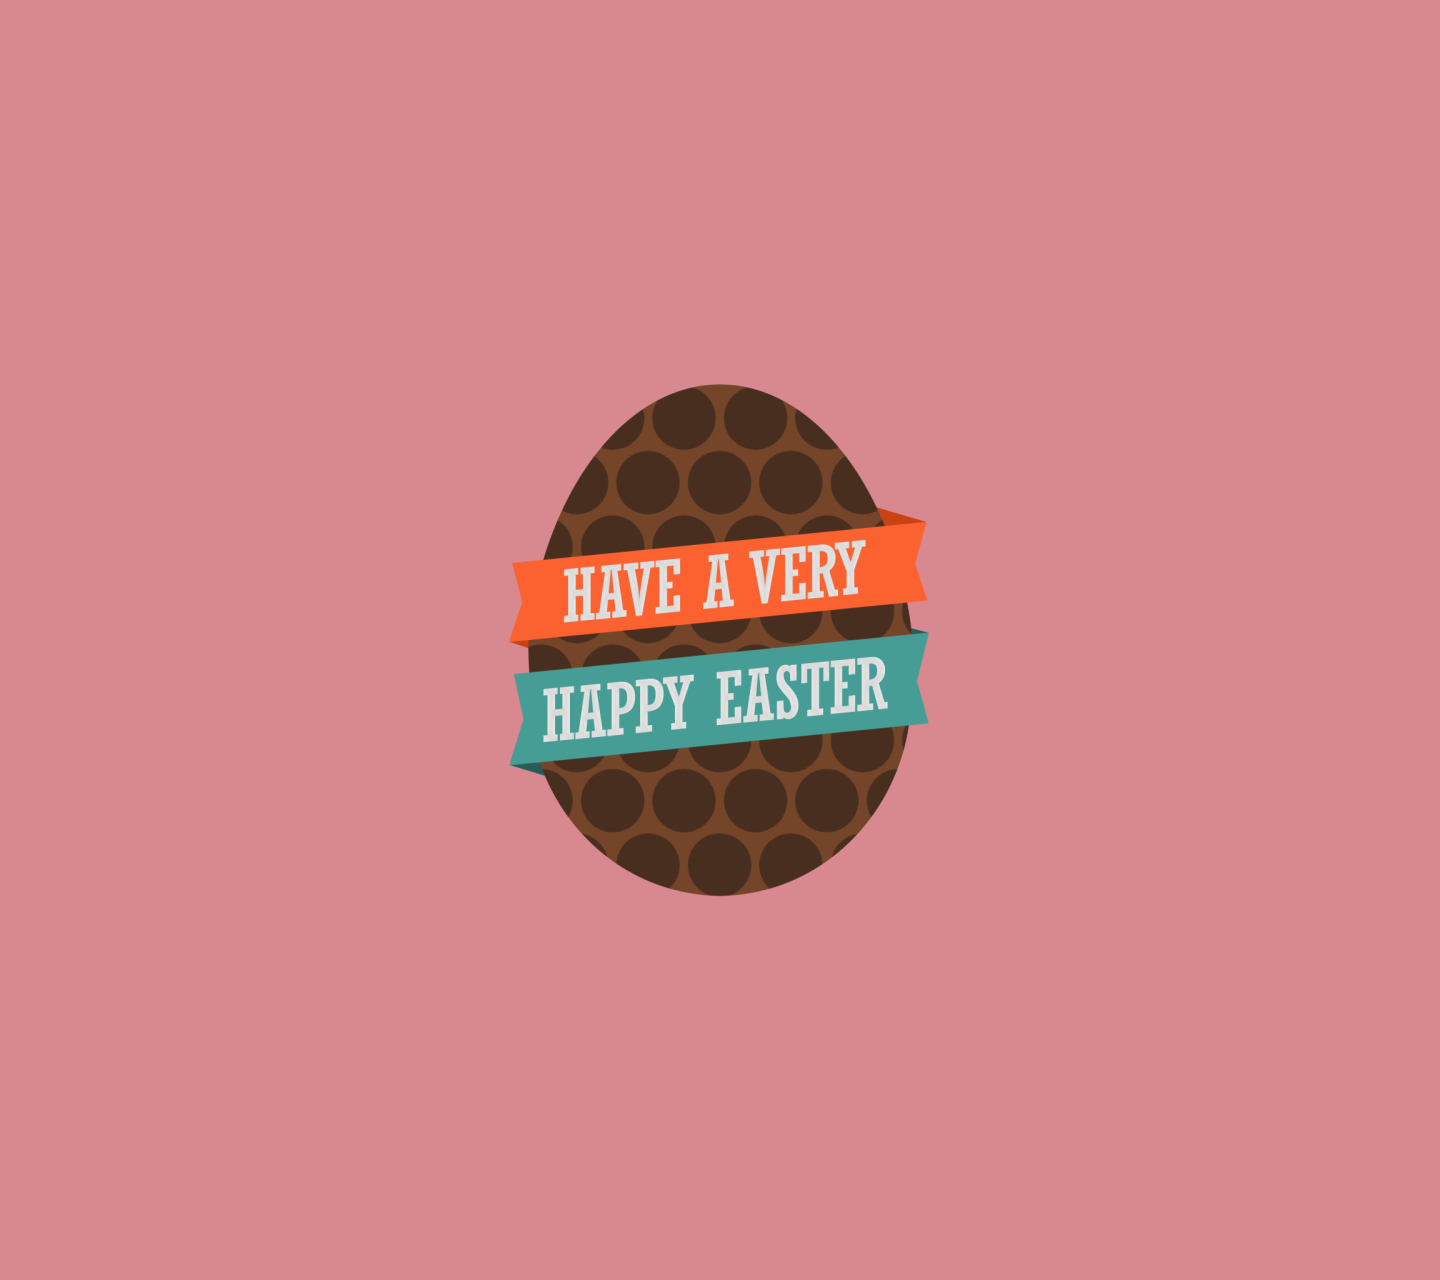 Very Happy Easter Egg wallpaper 1440x1280